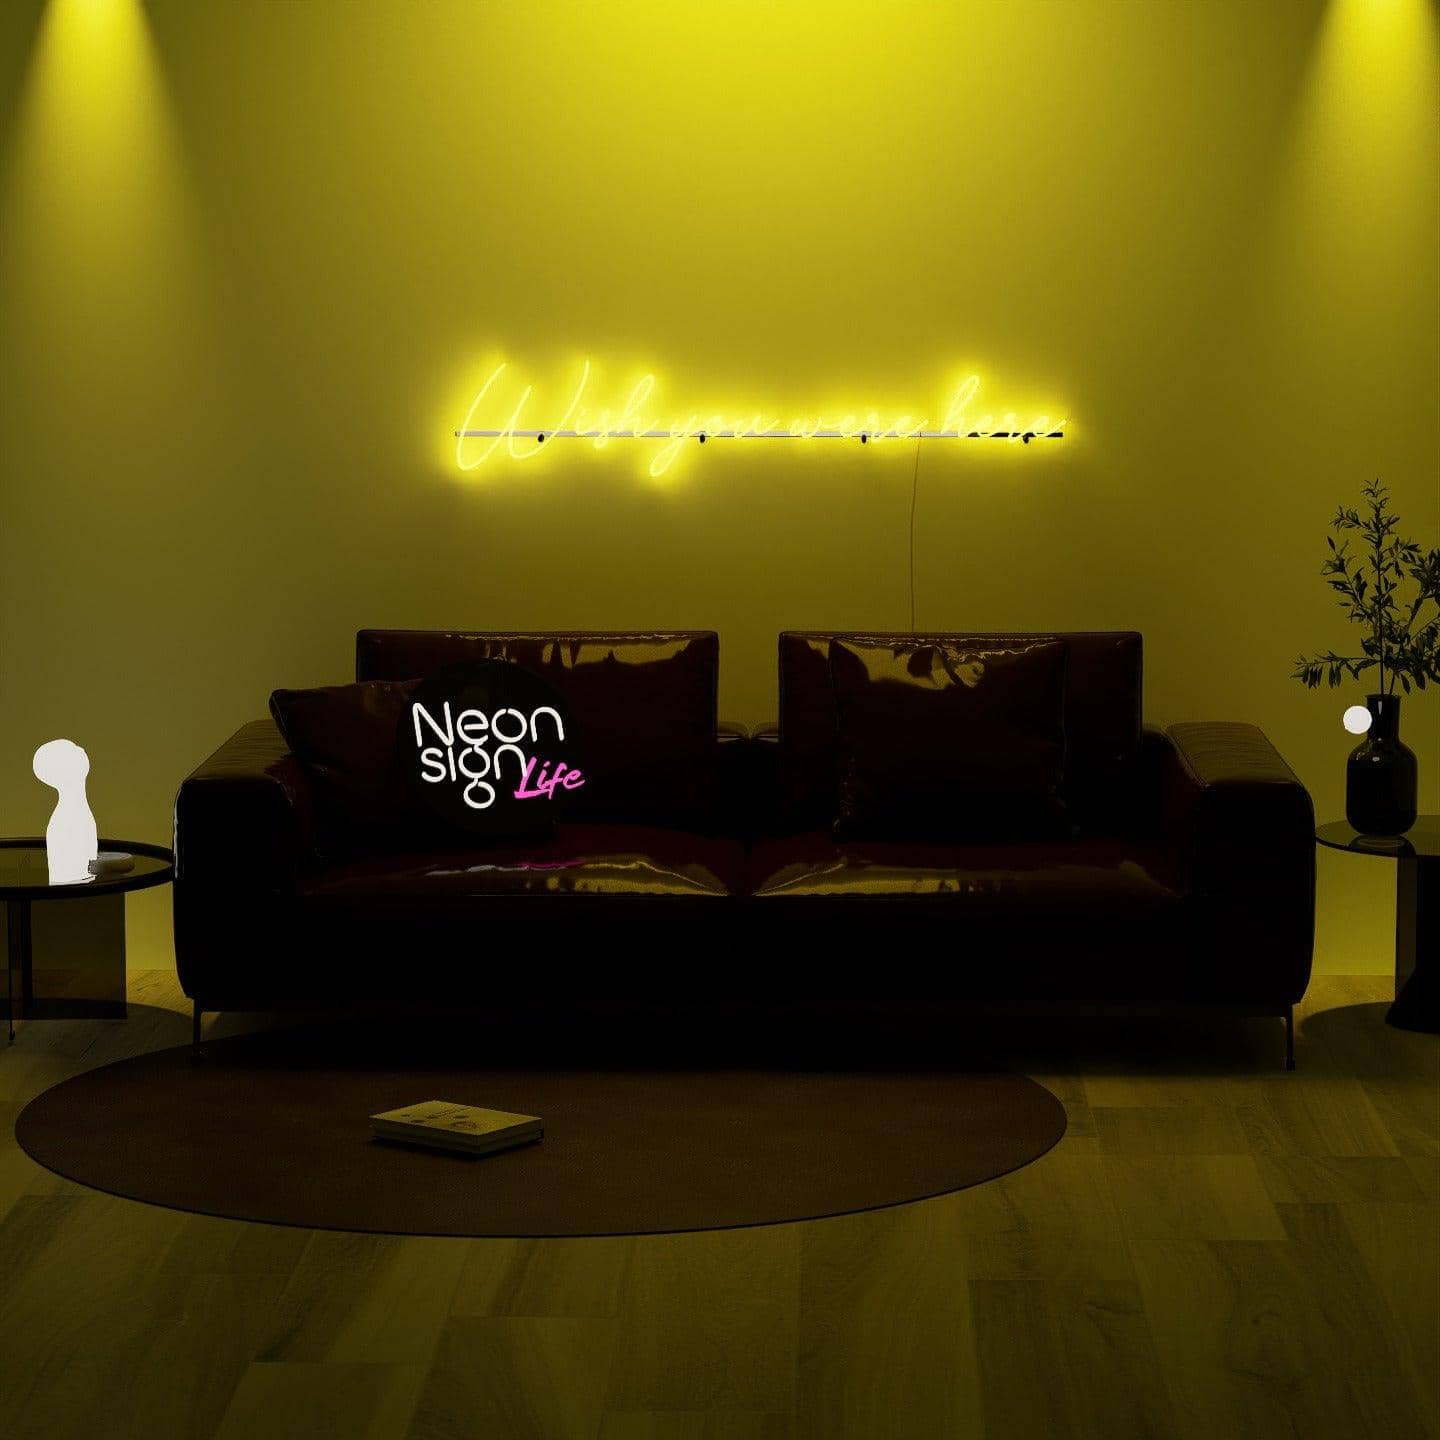 lit-yellow-neon-light-hanging-on-wall-at-night-wish-you-were-here